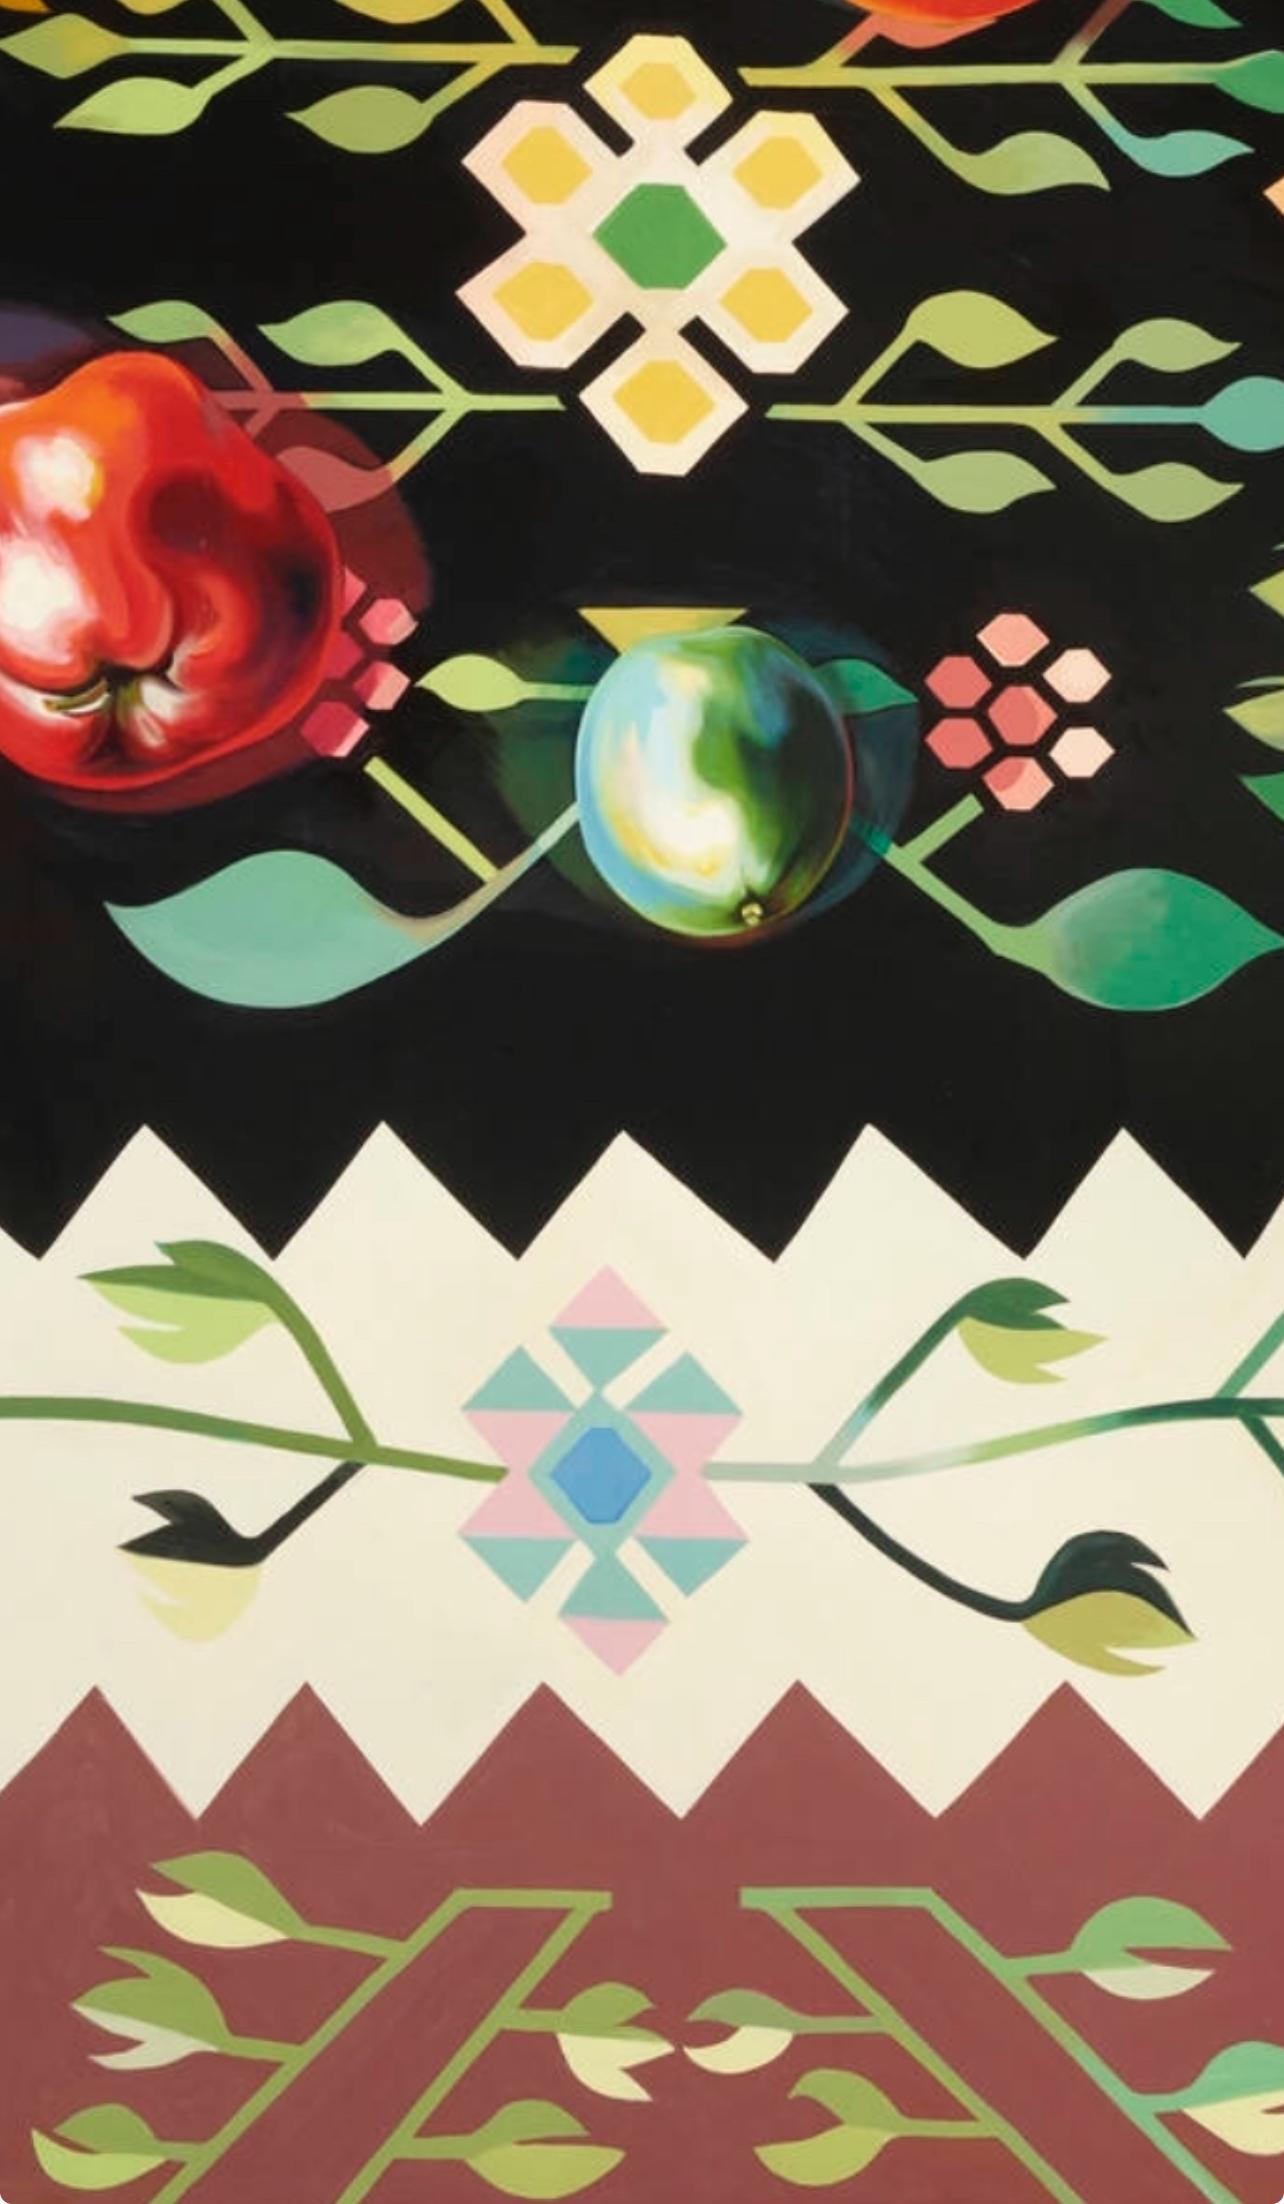 Fruit on Romanian Rug IV (100 x 80 inches), Lowell Nesbitt - Painting For Sale 3